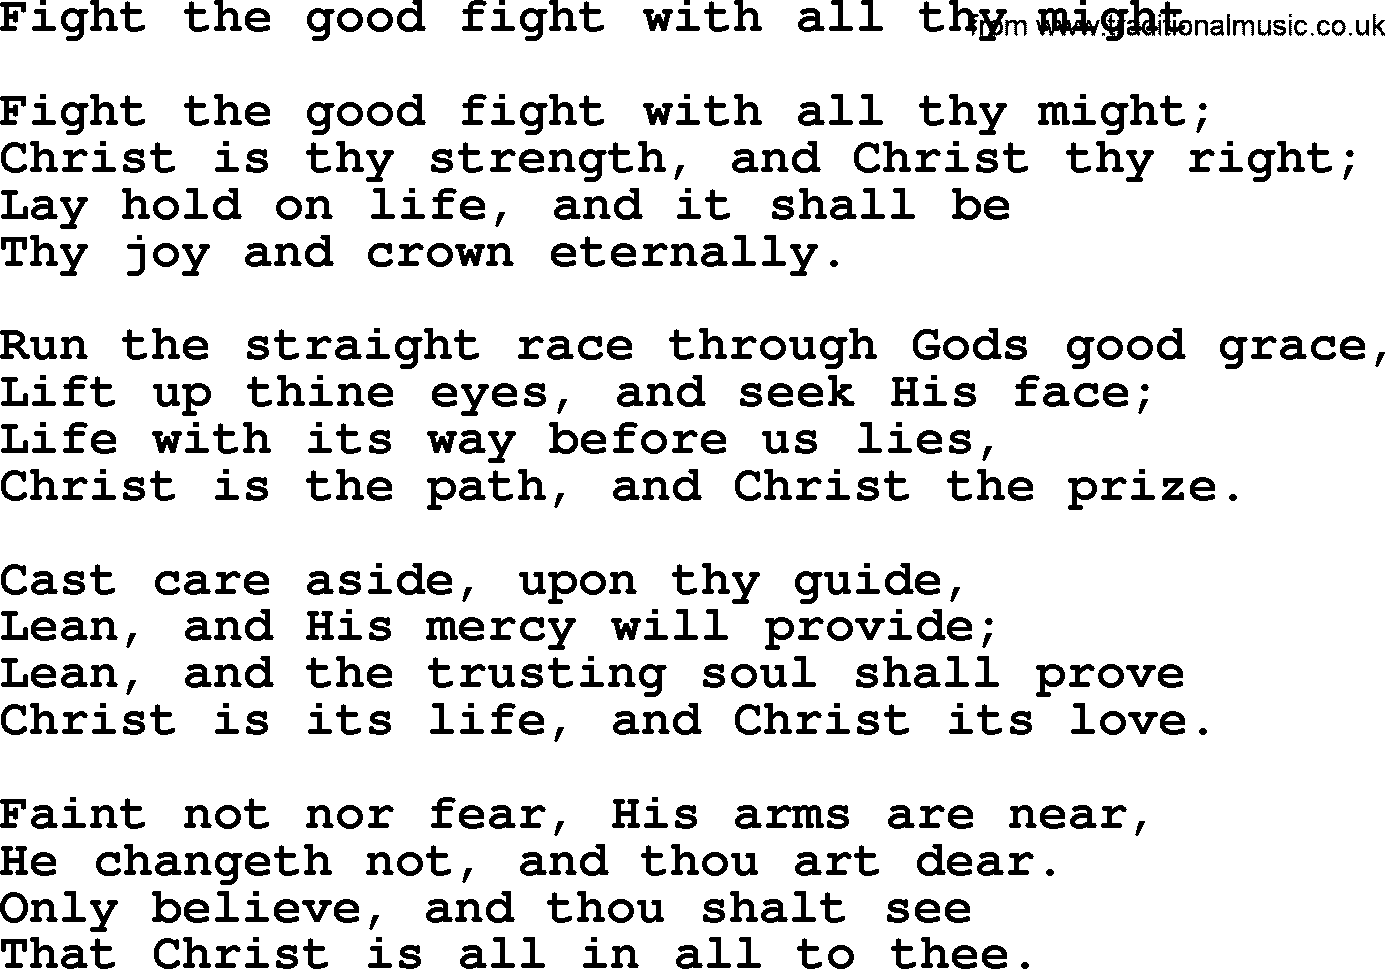 Top 500 Hymn: Fight The Good Fight With All Thy Might, lyrics